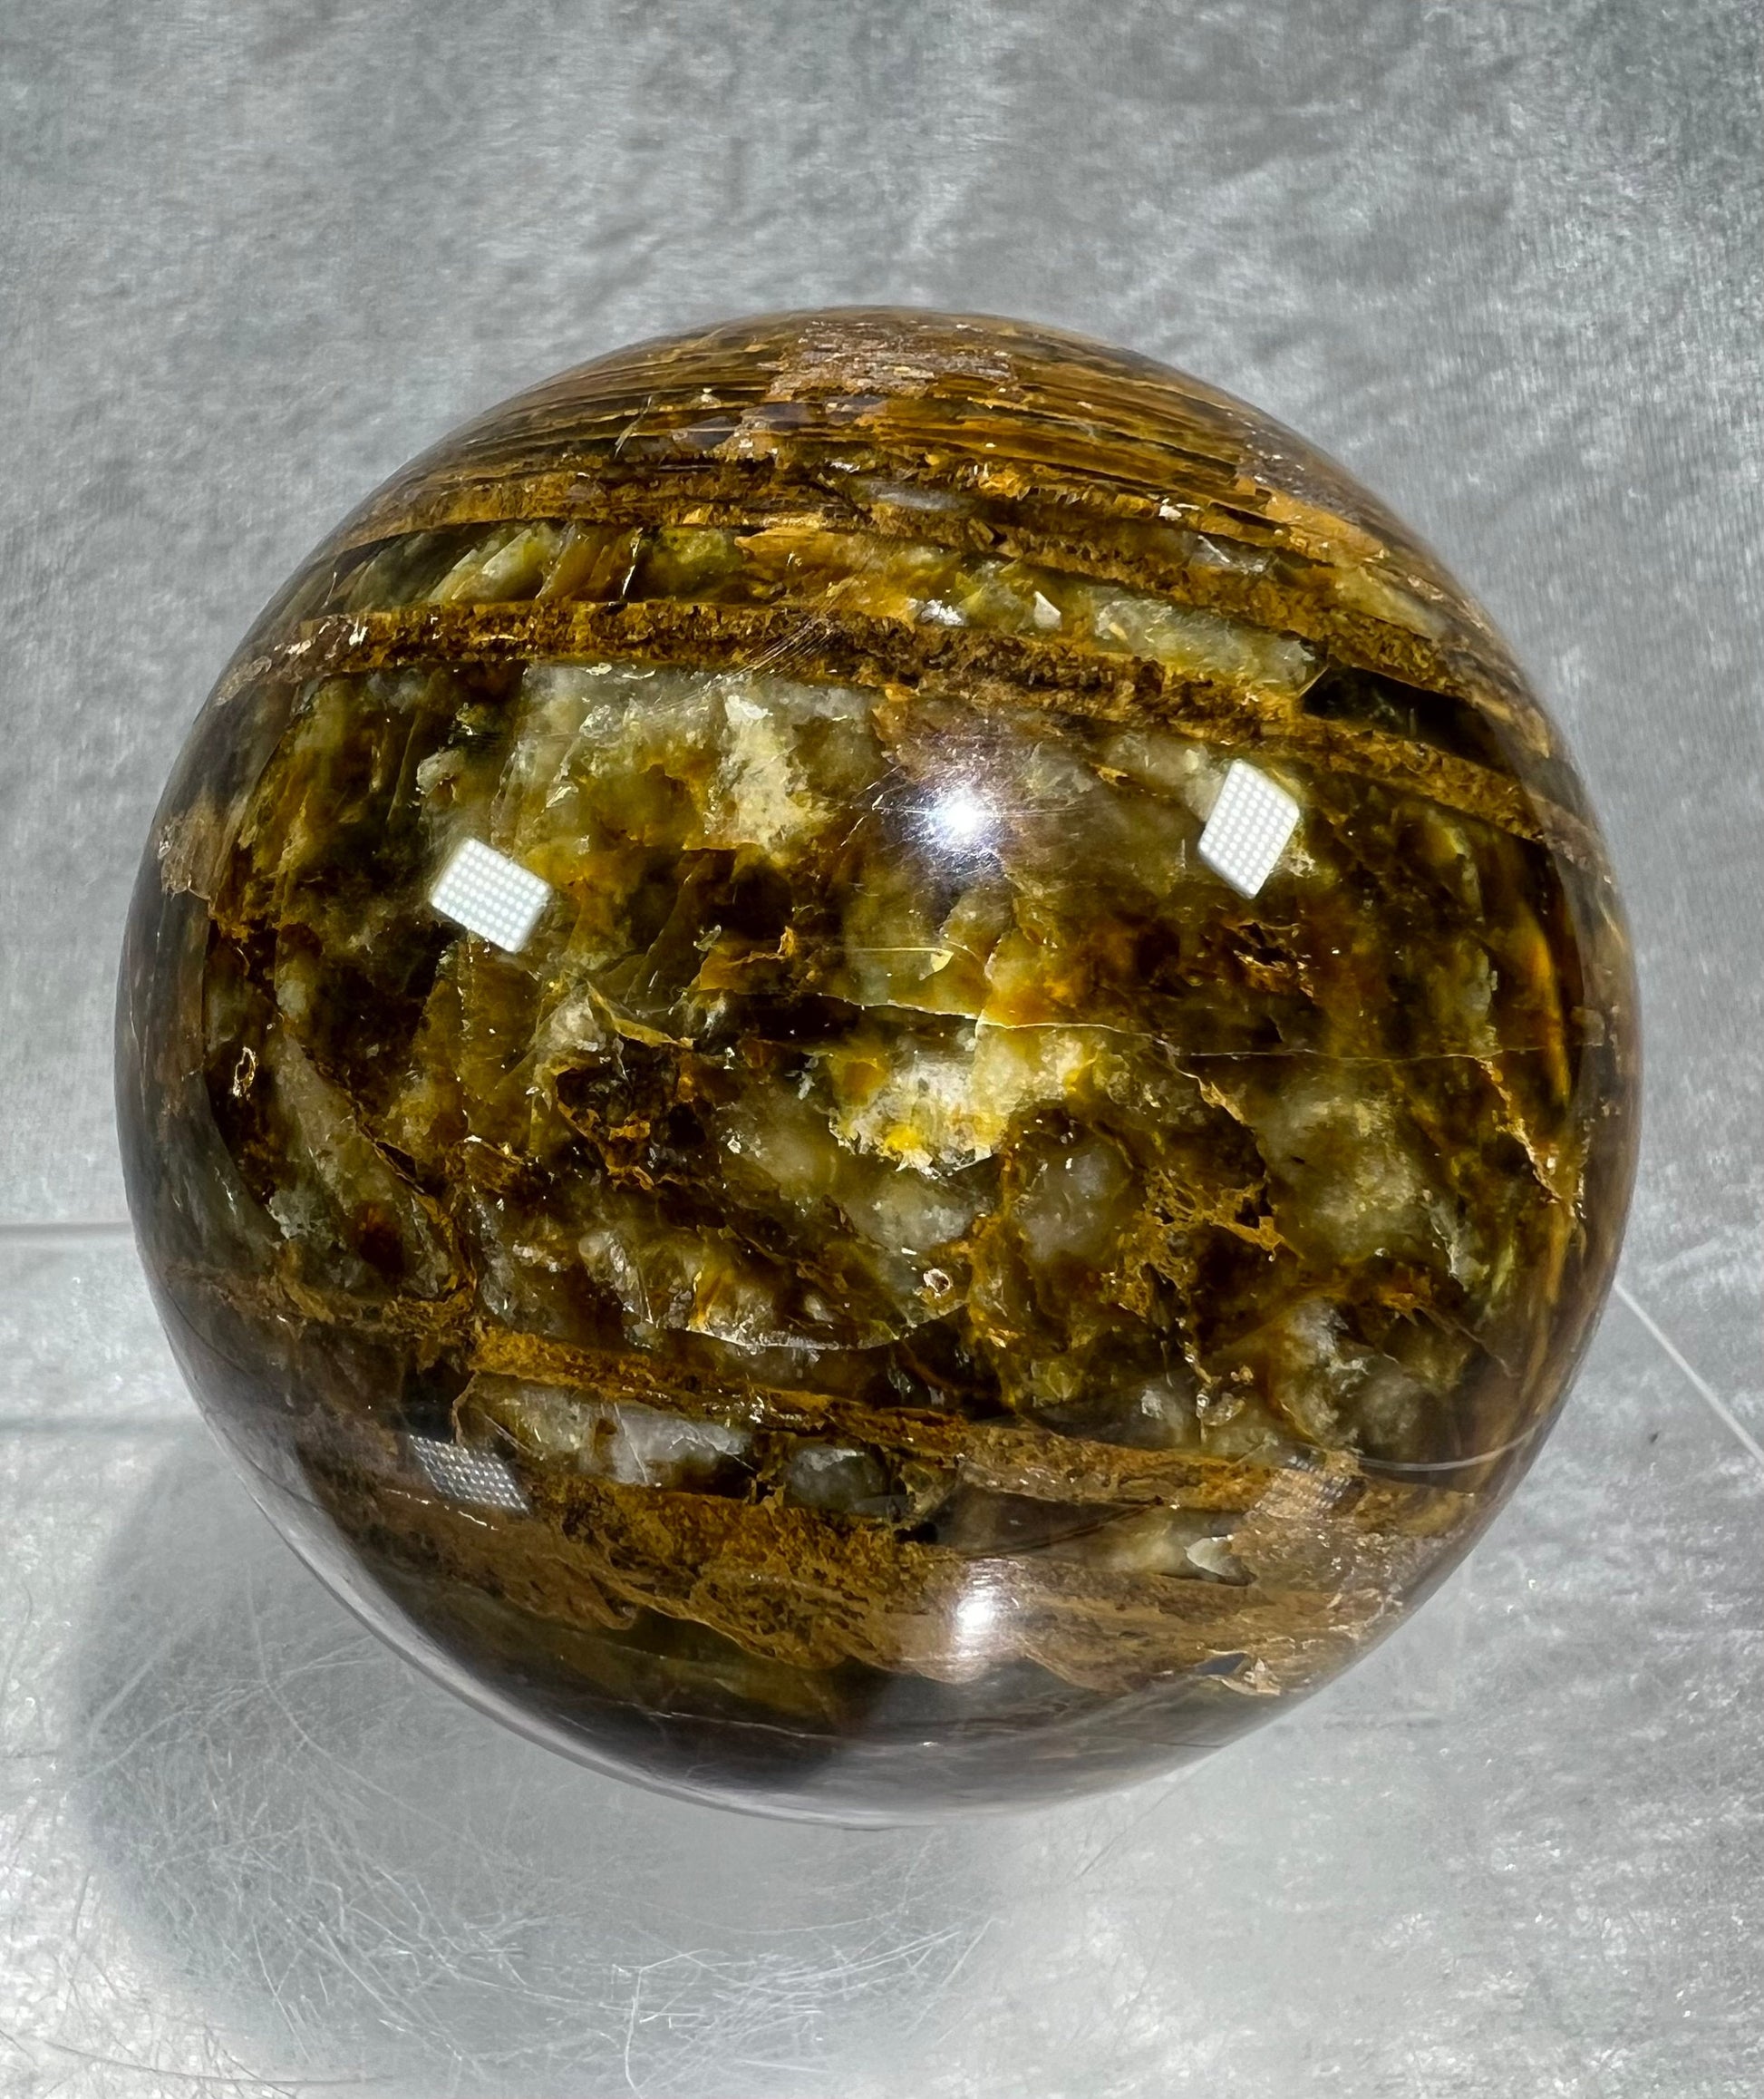 Gorgeous Large Pietersite Crystal Sphere. 74mm. Stunning Colors And Patterns. Amazing Shimmer And Flash!